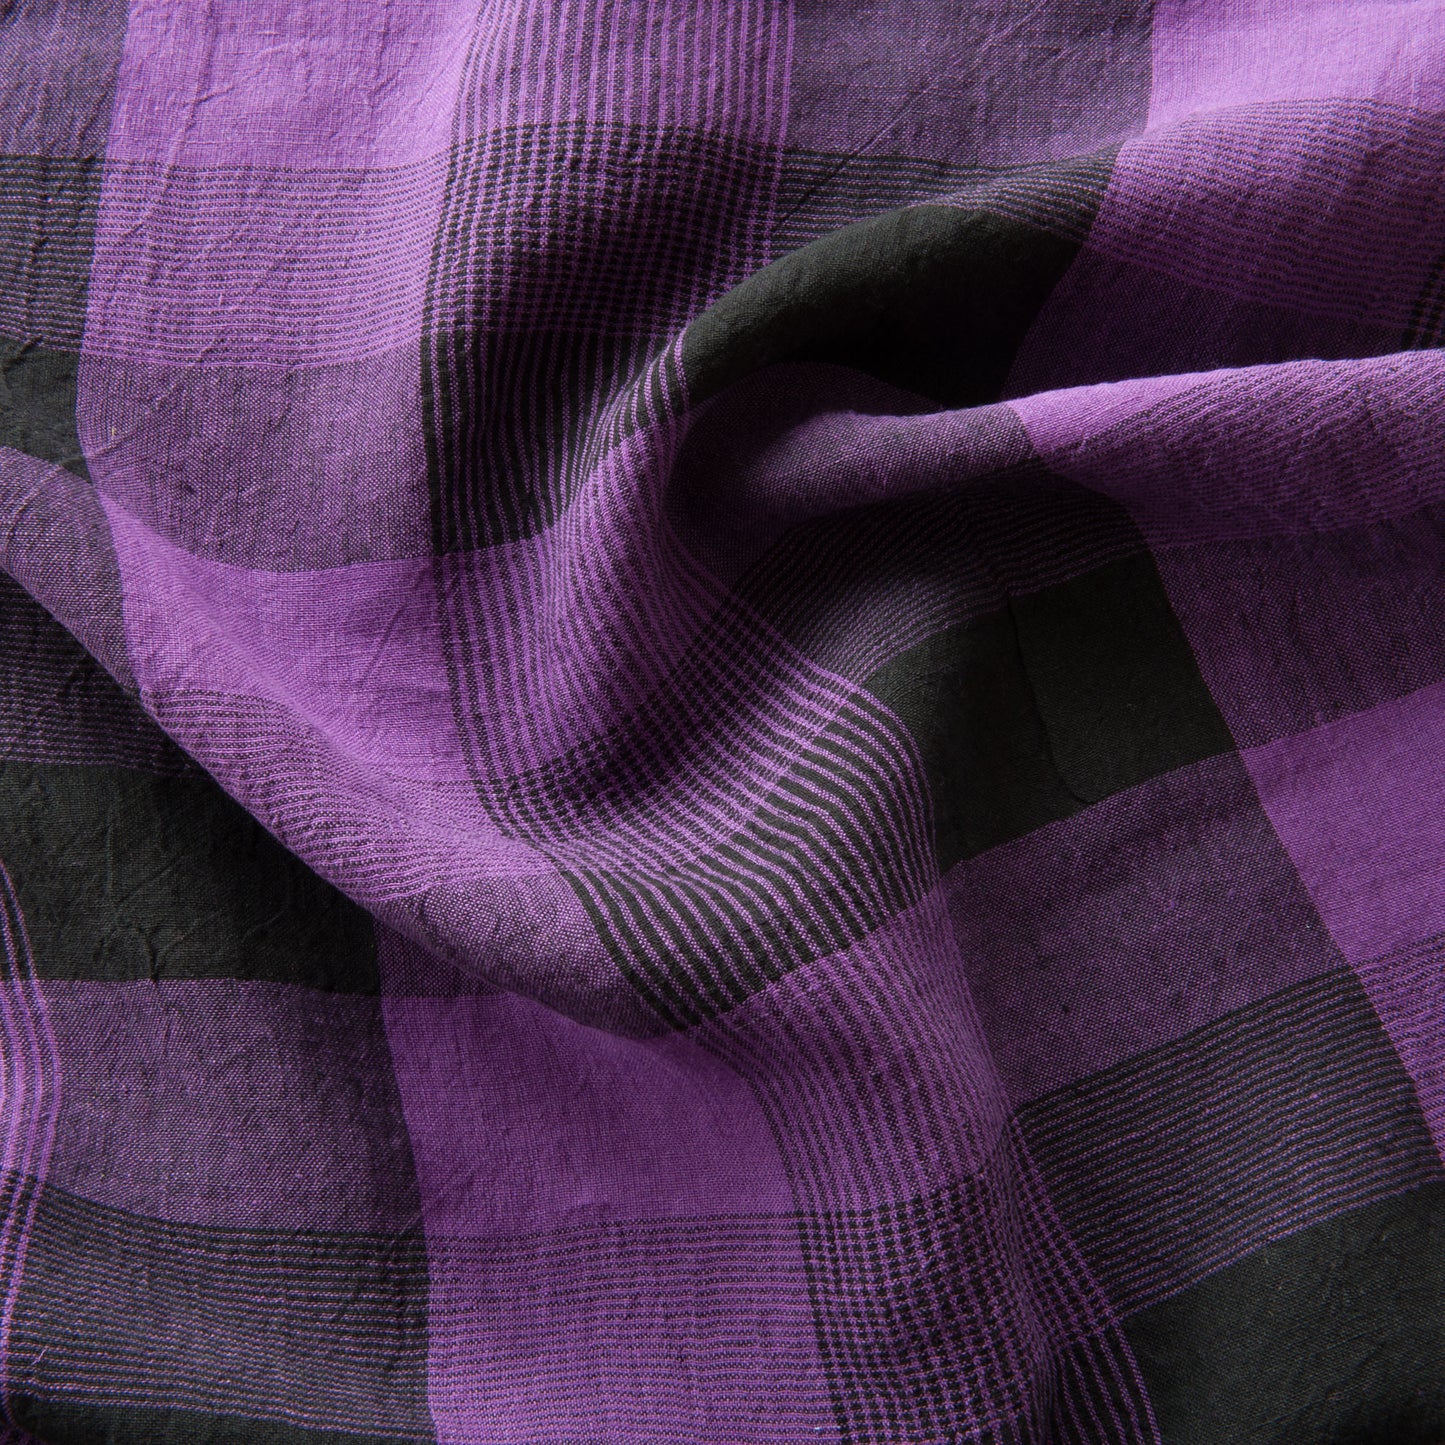 Checked Linen Fabric in Purple and Black